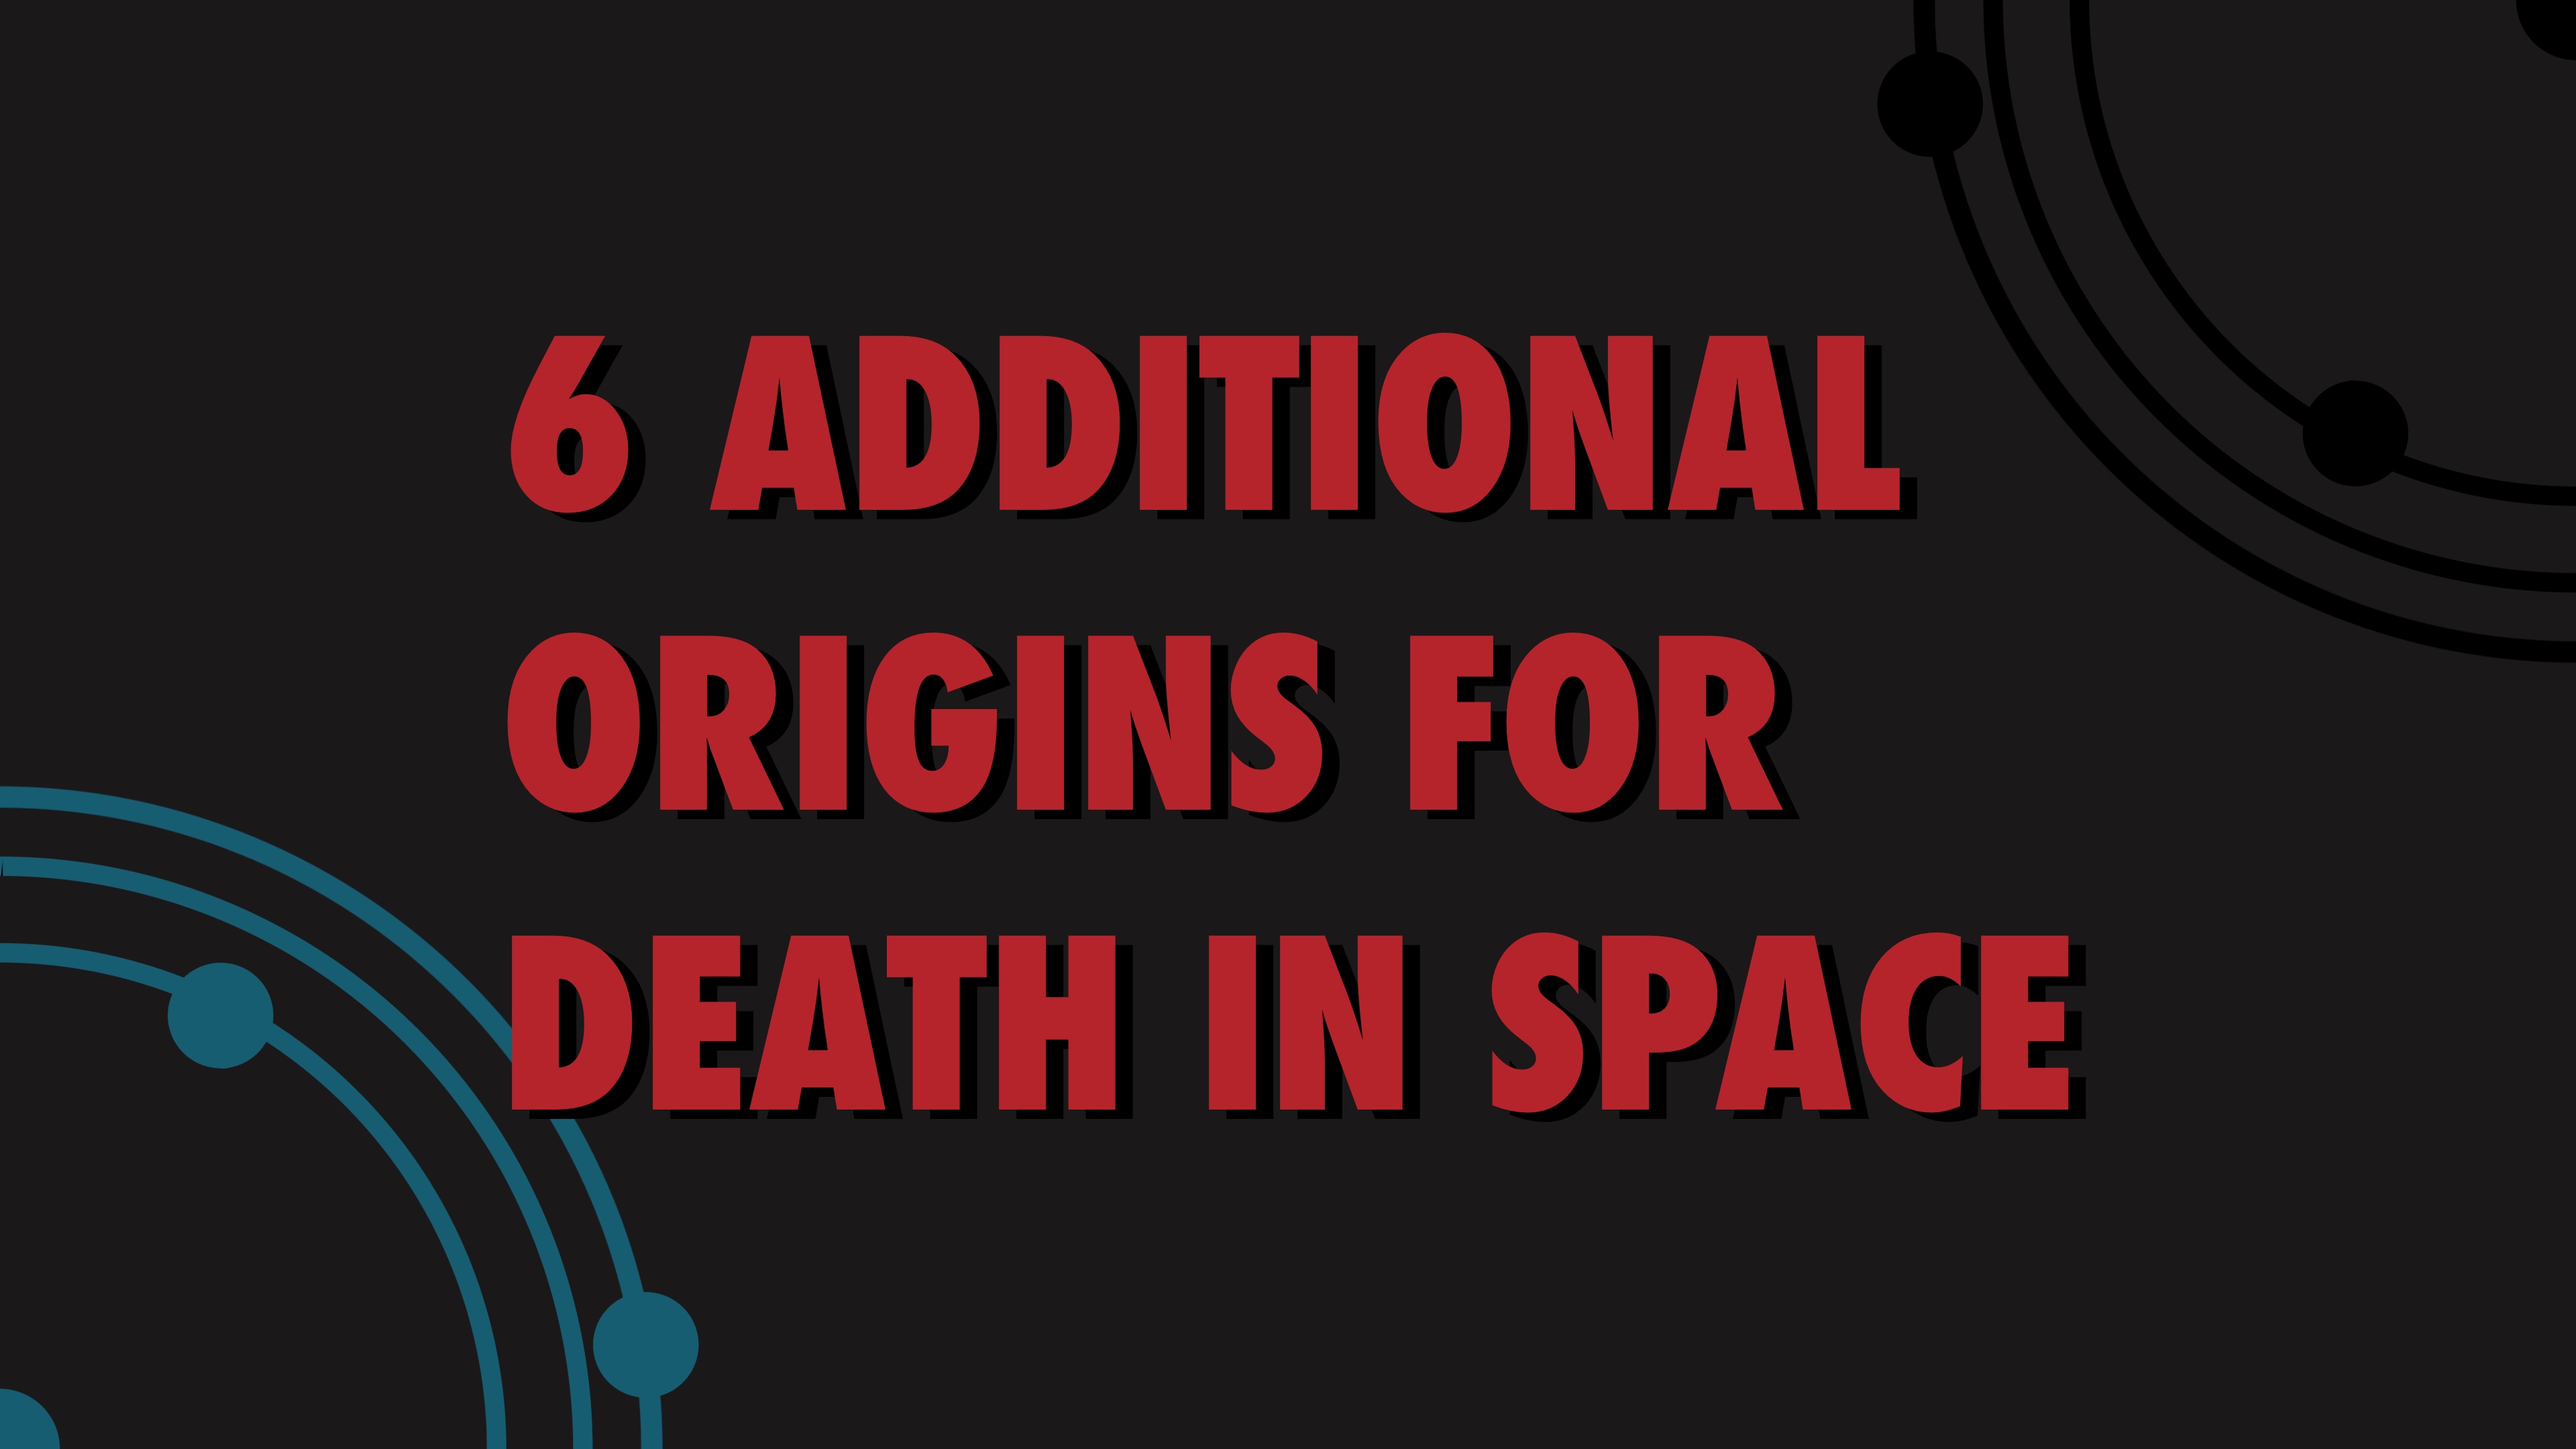 6 Additional Origins for Death in Space